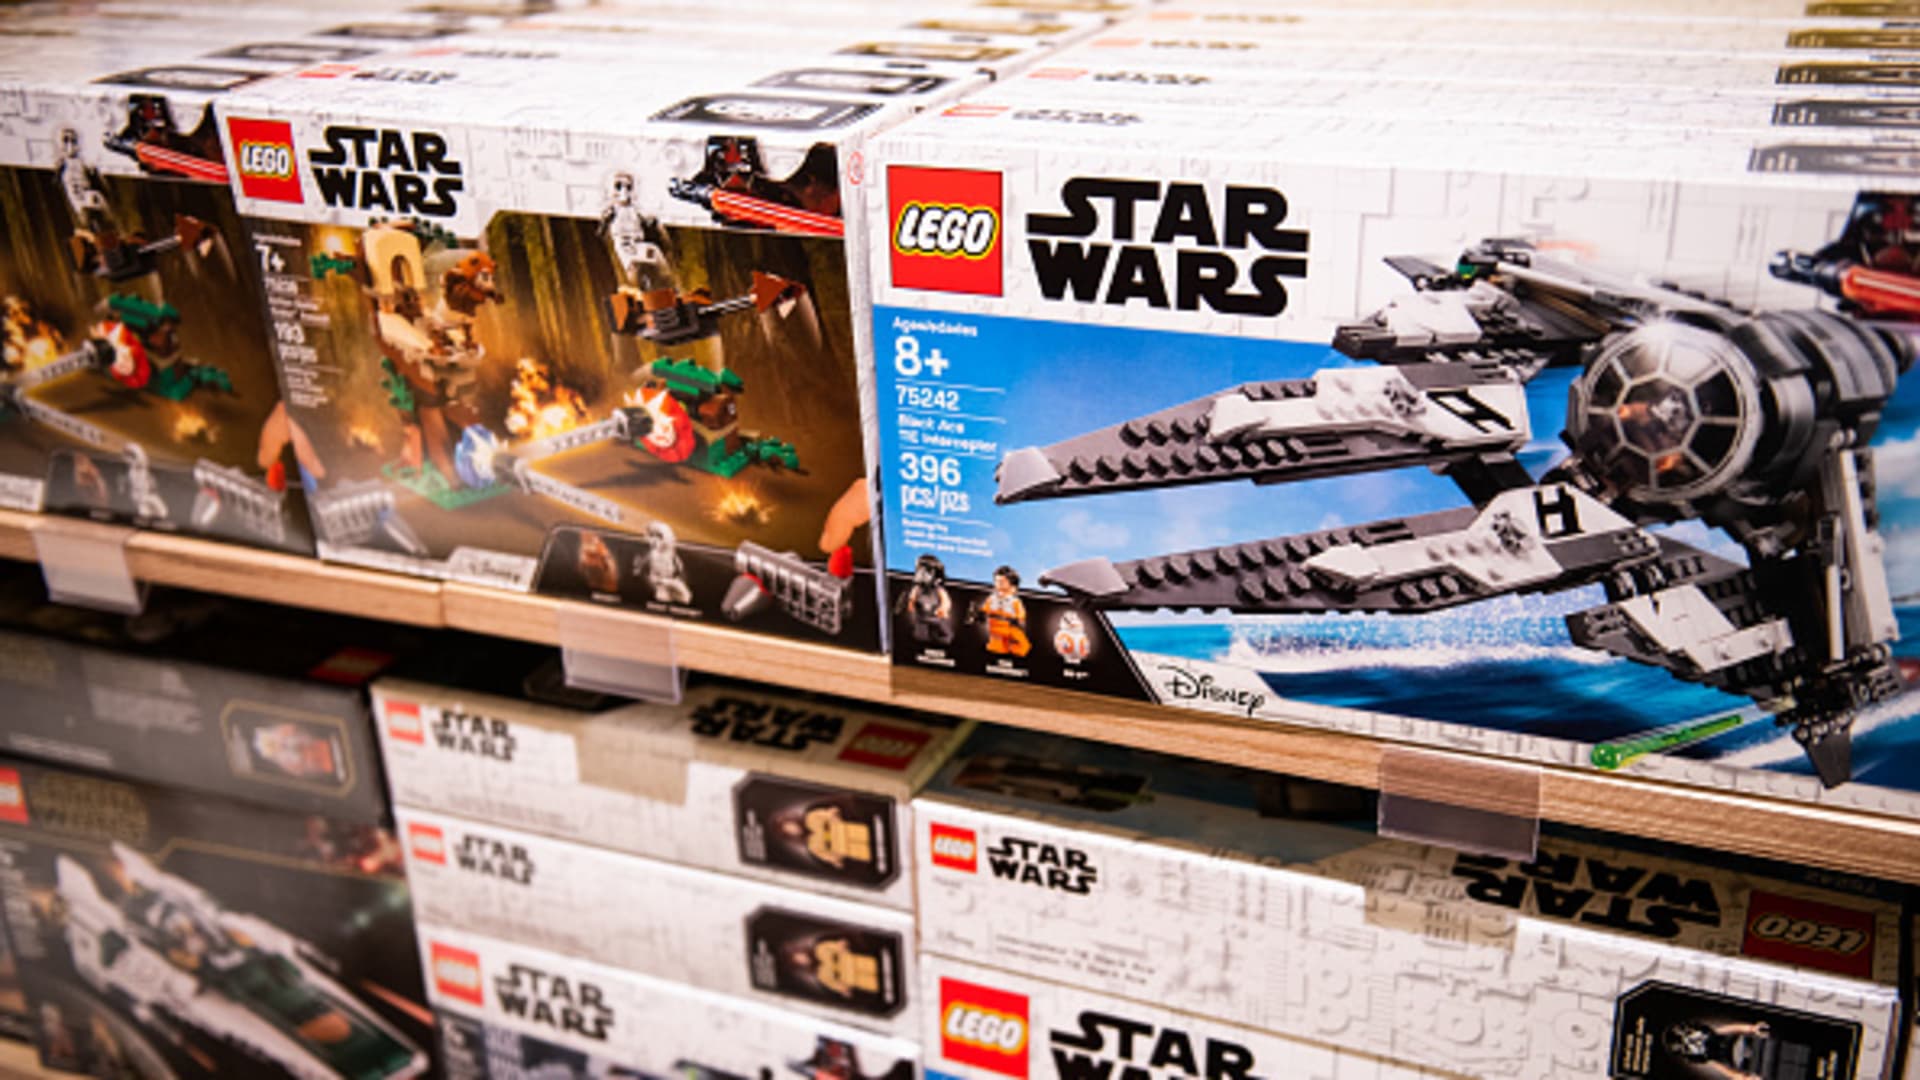 Lego sales increase while other toy makers struggle